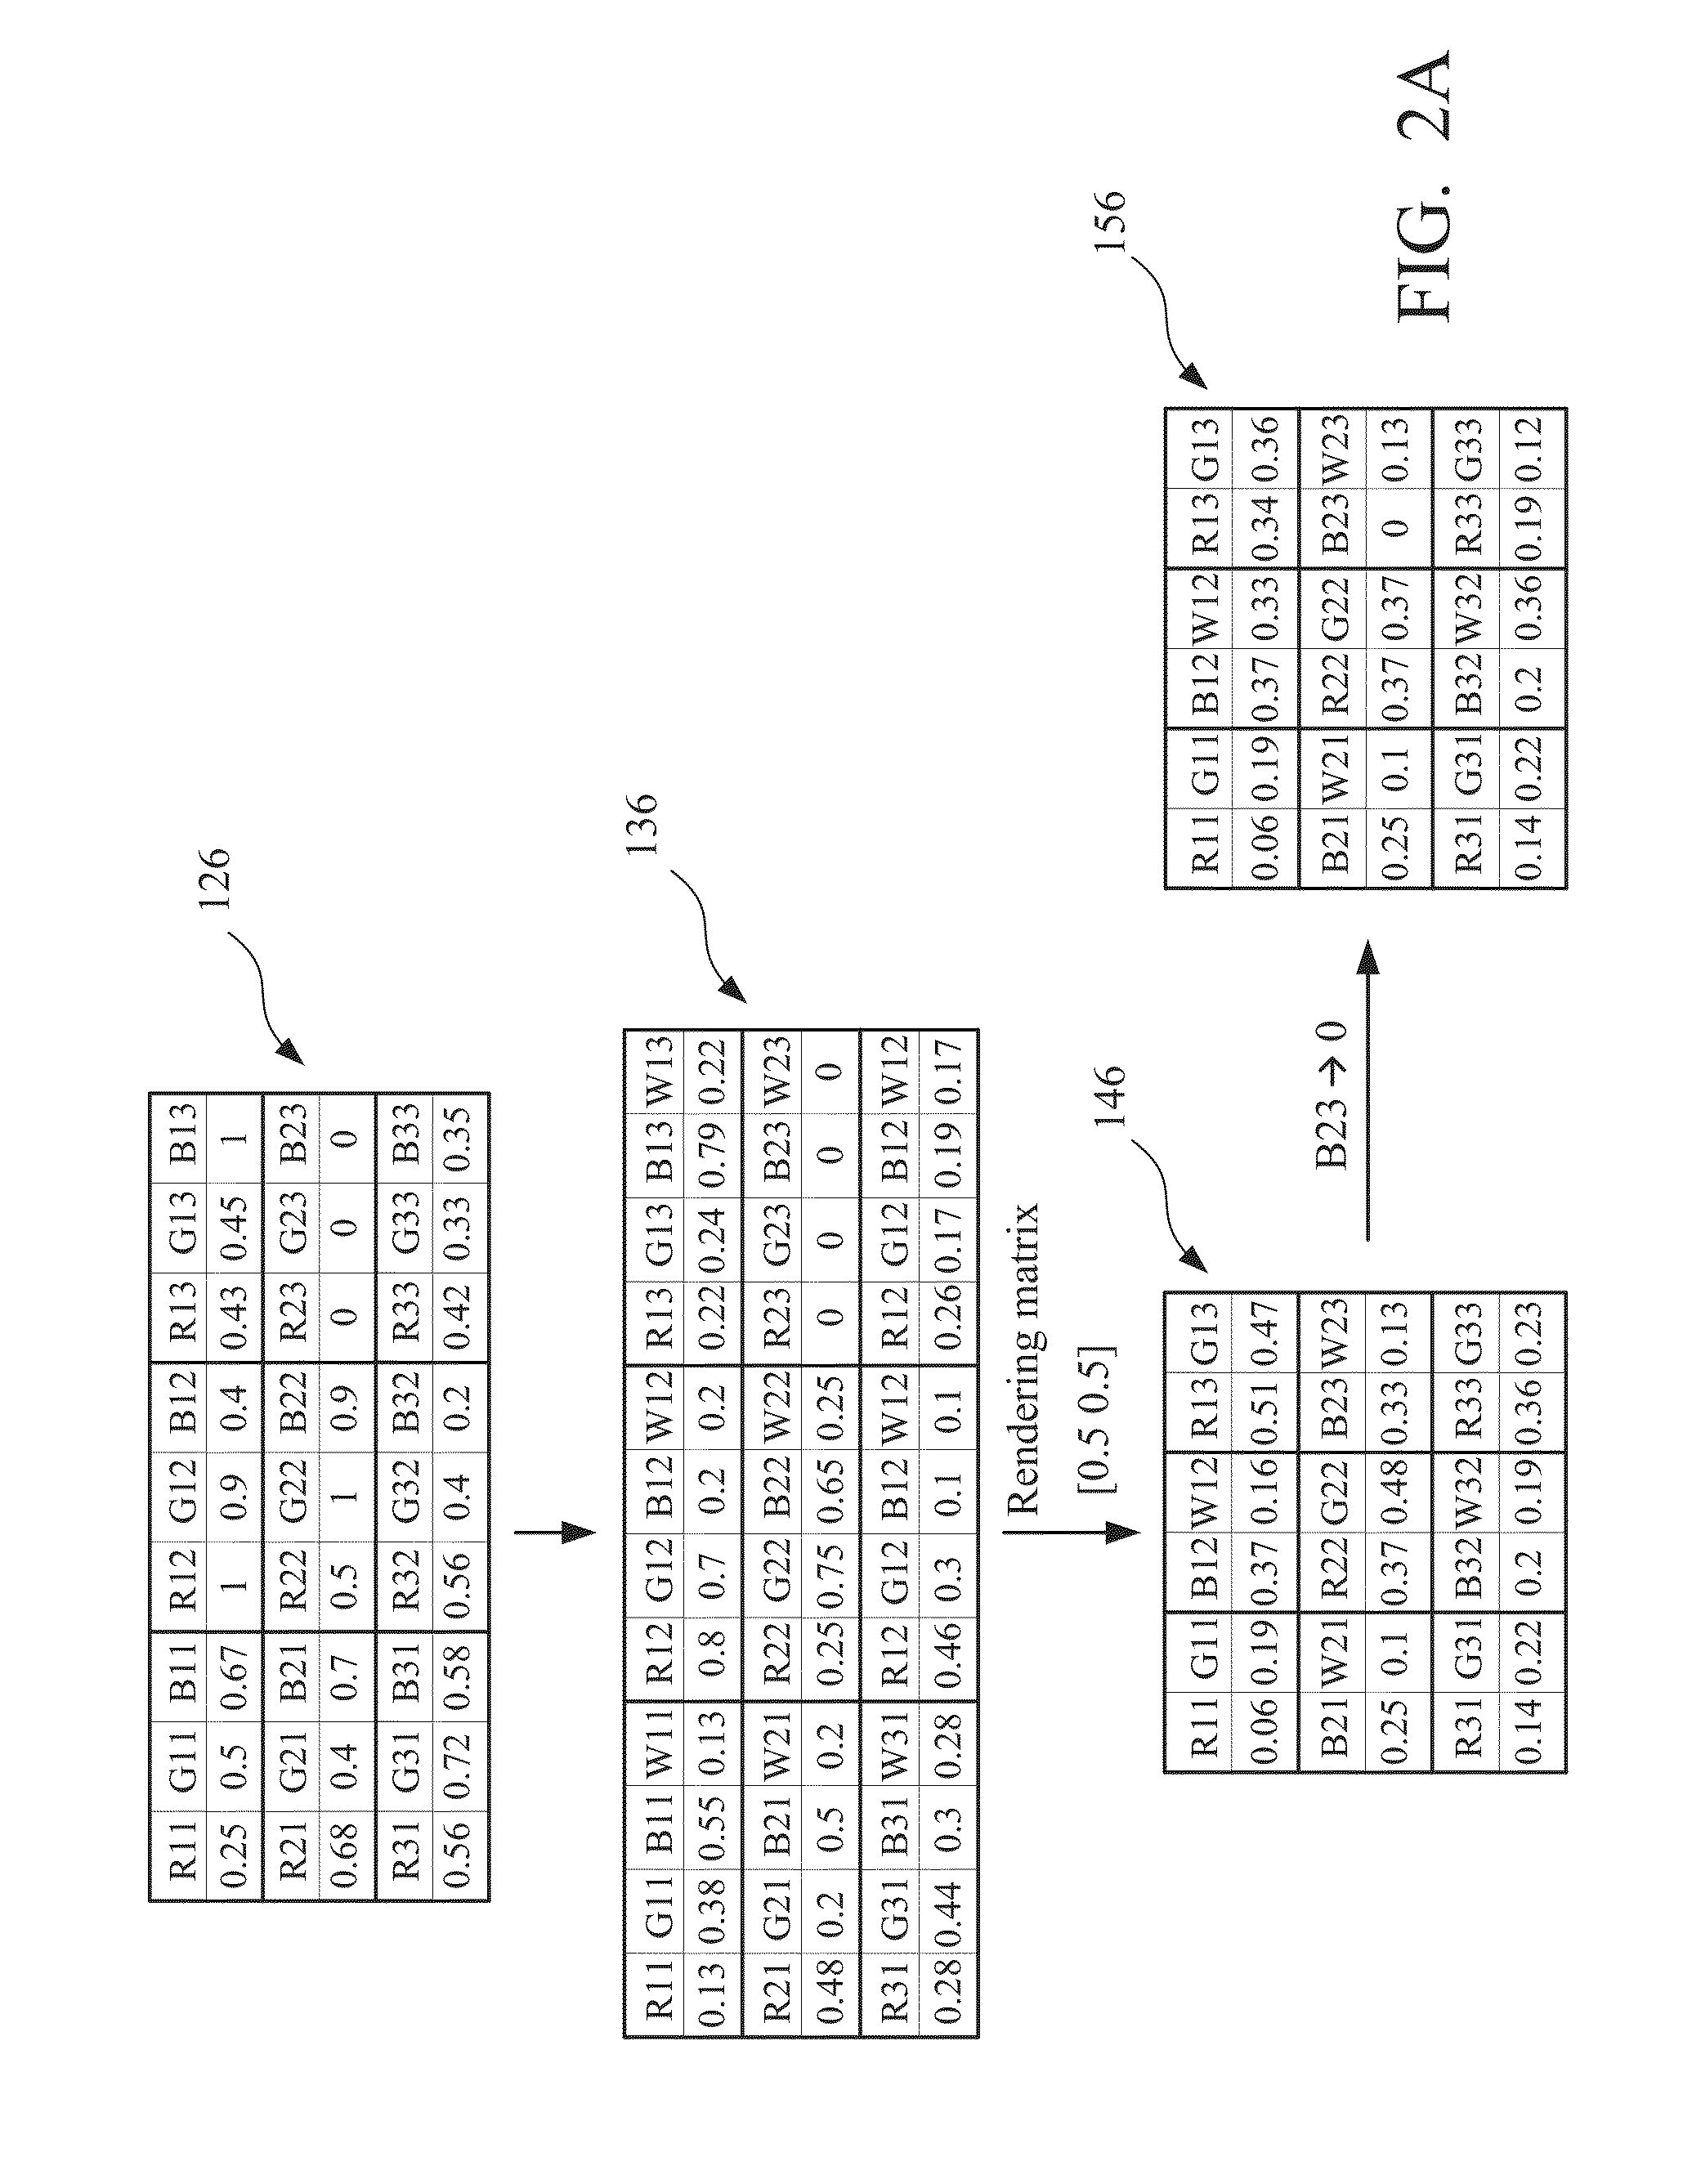 Displaying method and display with subpixel rendering